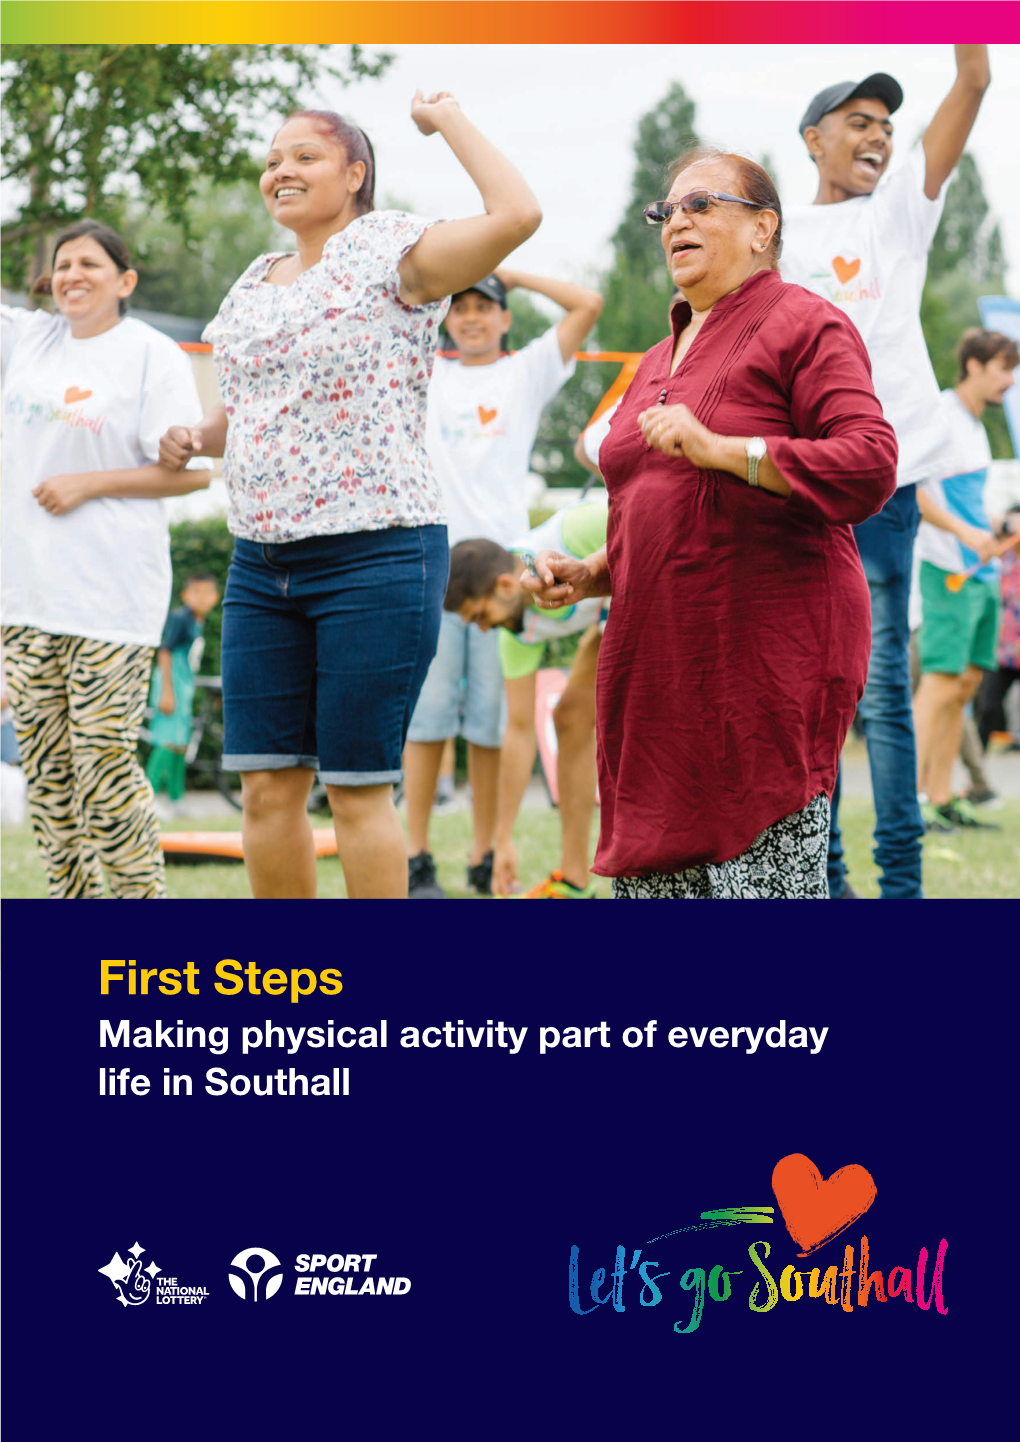 First Steps Making Physical Activity Part of Everyday Life in Southall in Brief at a Glance 69,857 in Southall, We Will: People Live